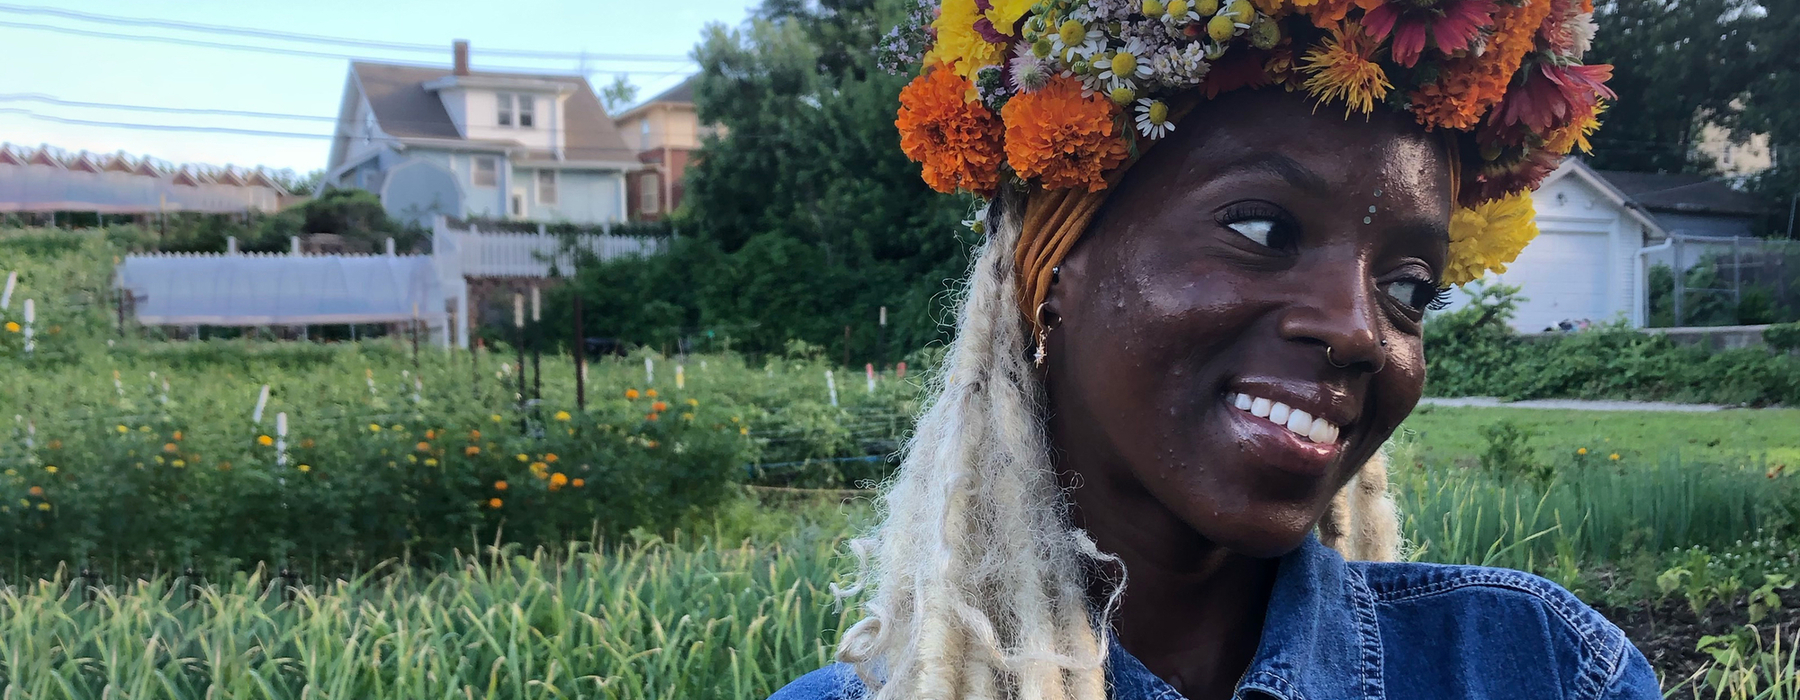 Woman stands in small urban flower field with a flower crown on her head